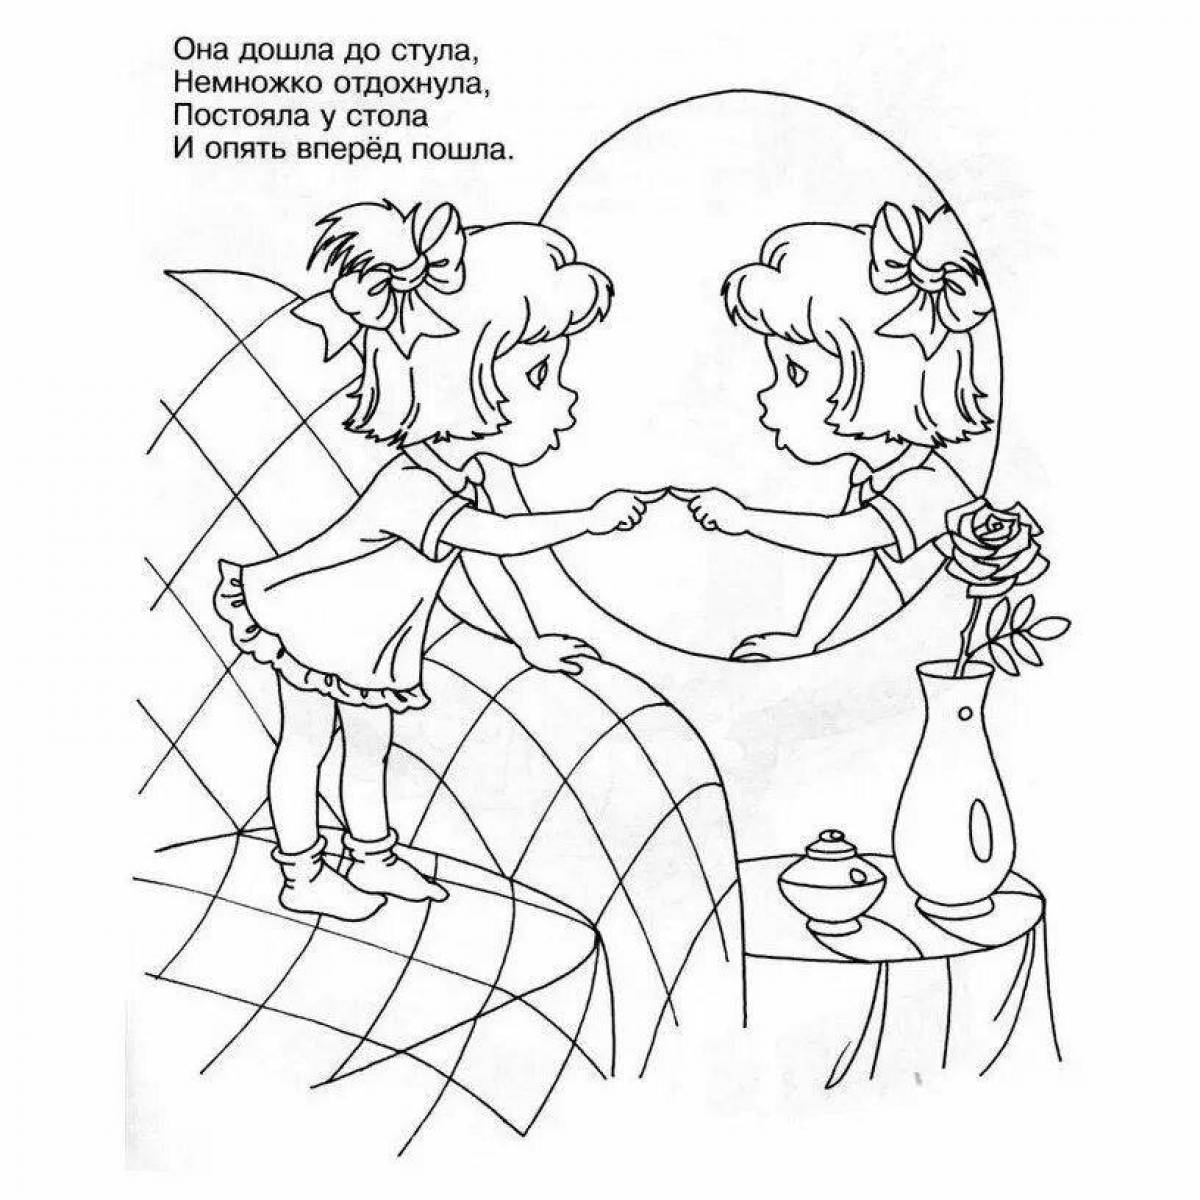 Charming coloring book based on agnia barto's poems